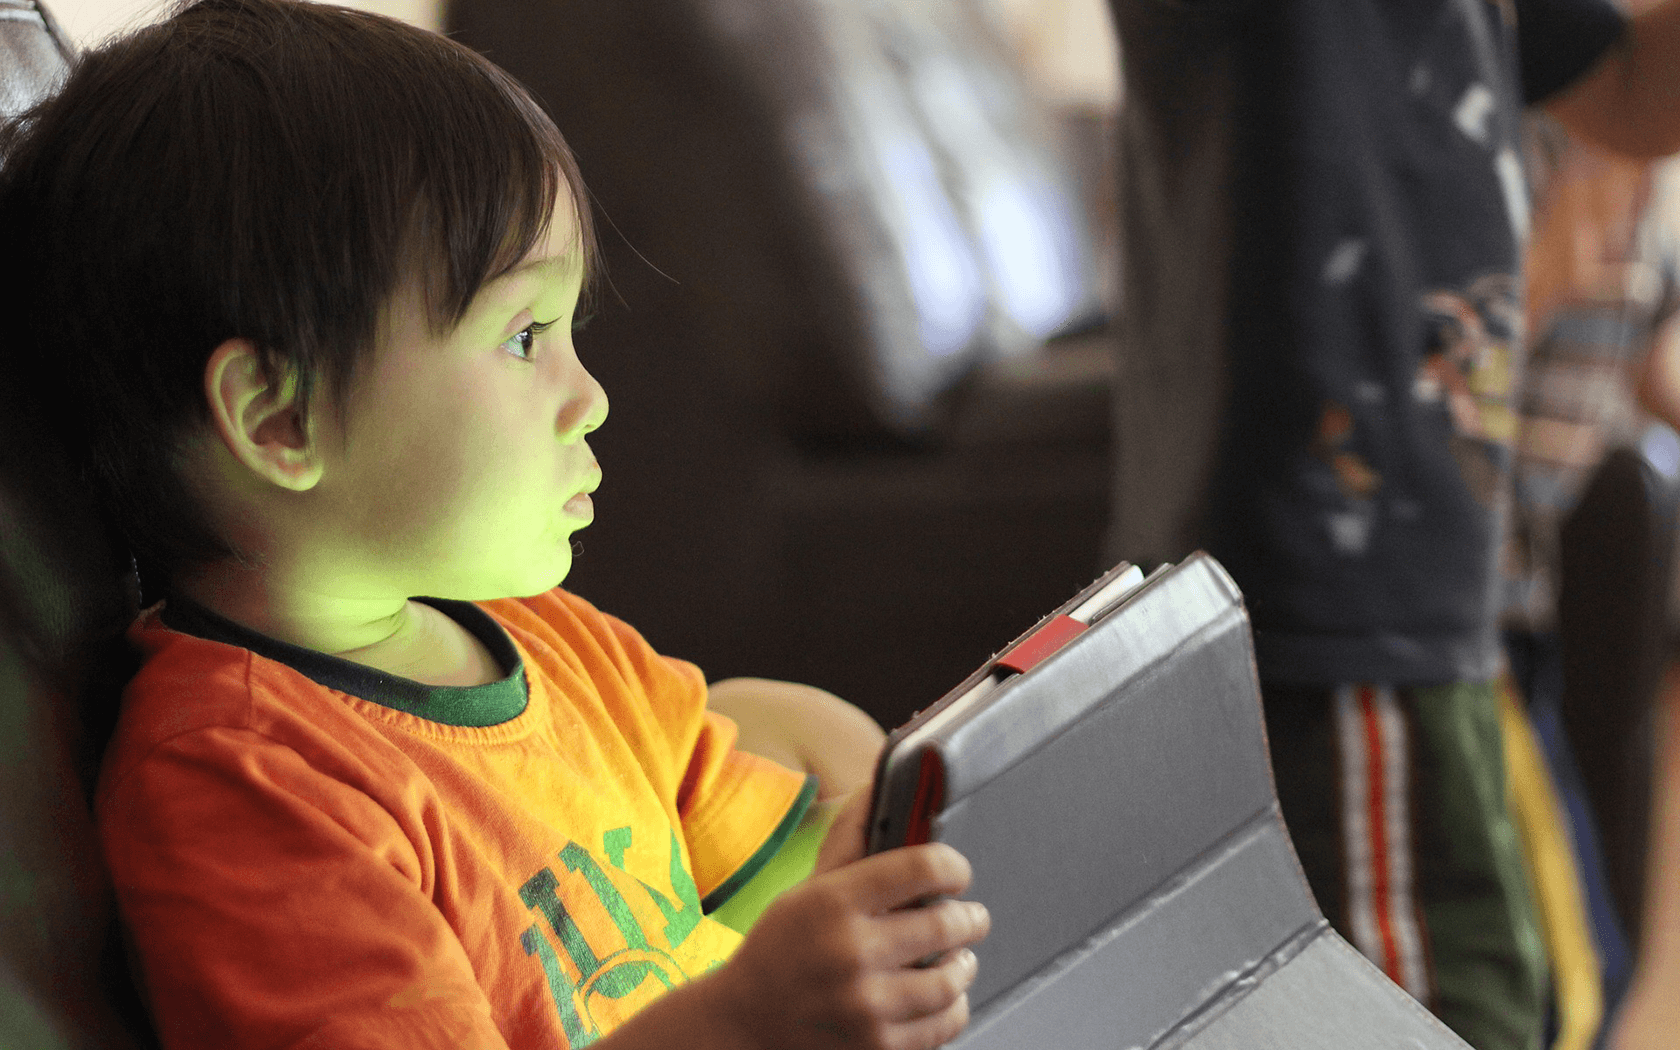 Parental Guidance Suggested: What to Do When Your Kid Sees Inappropriate Content Online